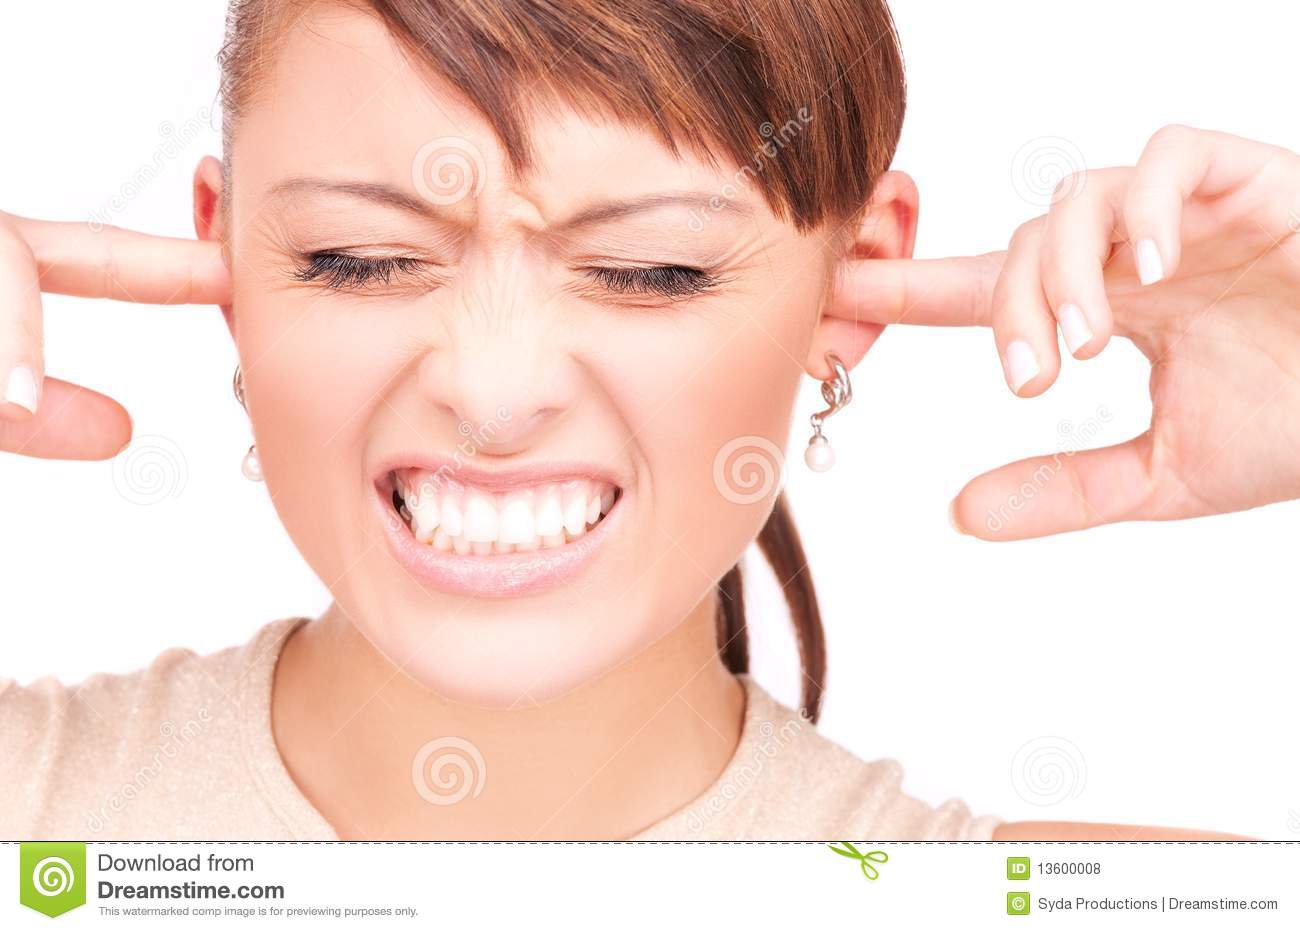 Unhappy Woman With Fingers In Ears Royalty Free Stock Photos   Image    